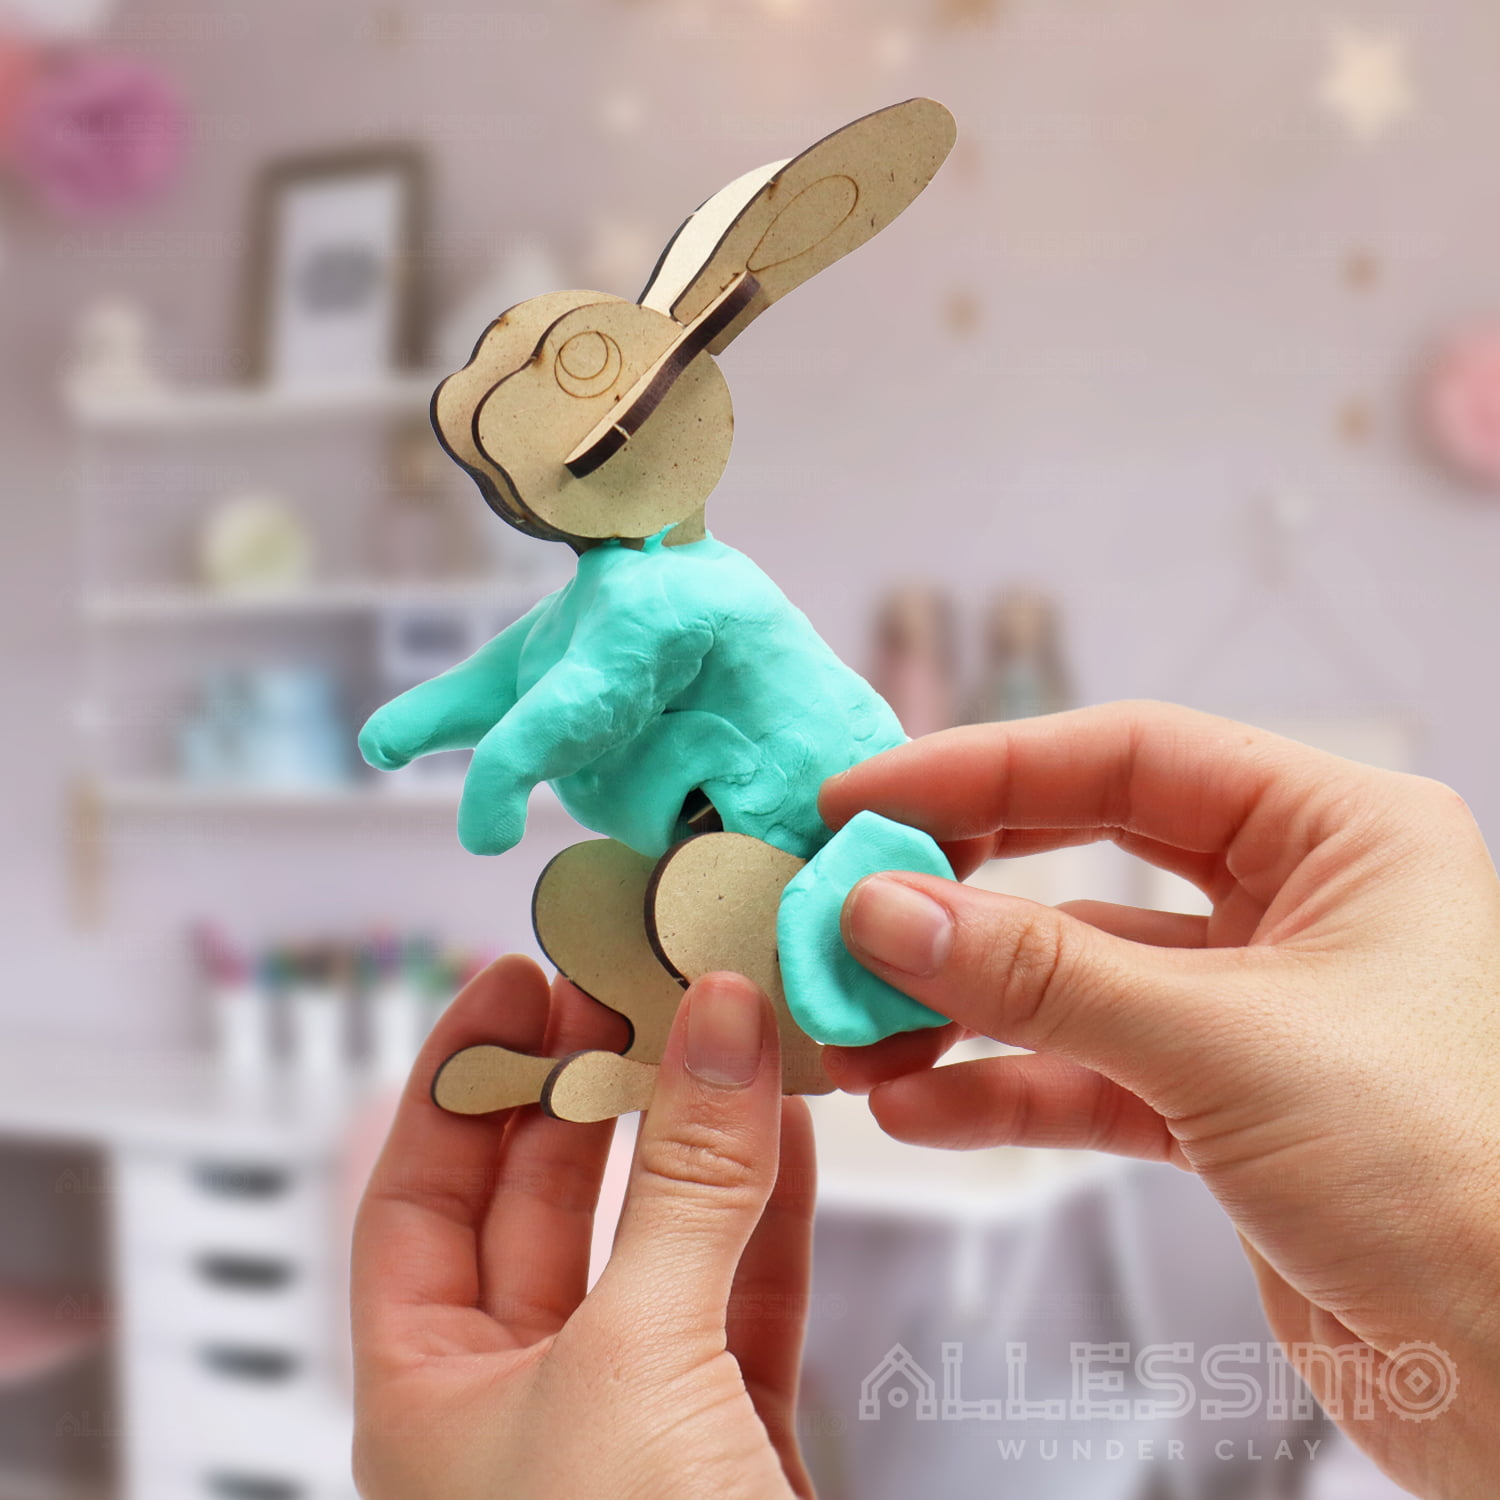 3D Clay Puzzle Rabbit kit for Kids Boys Girls for Ages 5+ Allessimo WunderClay 